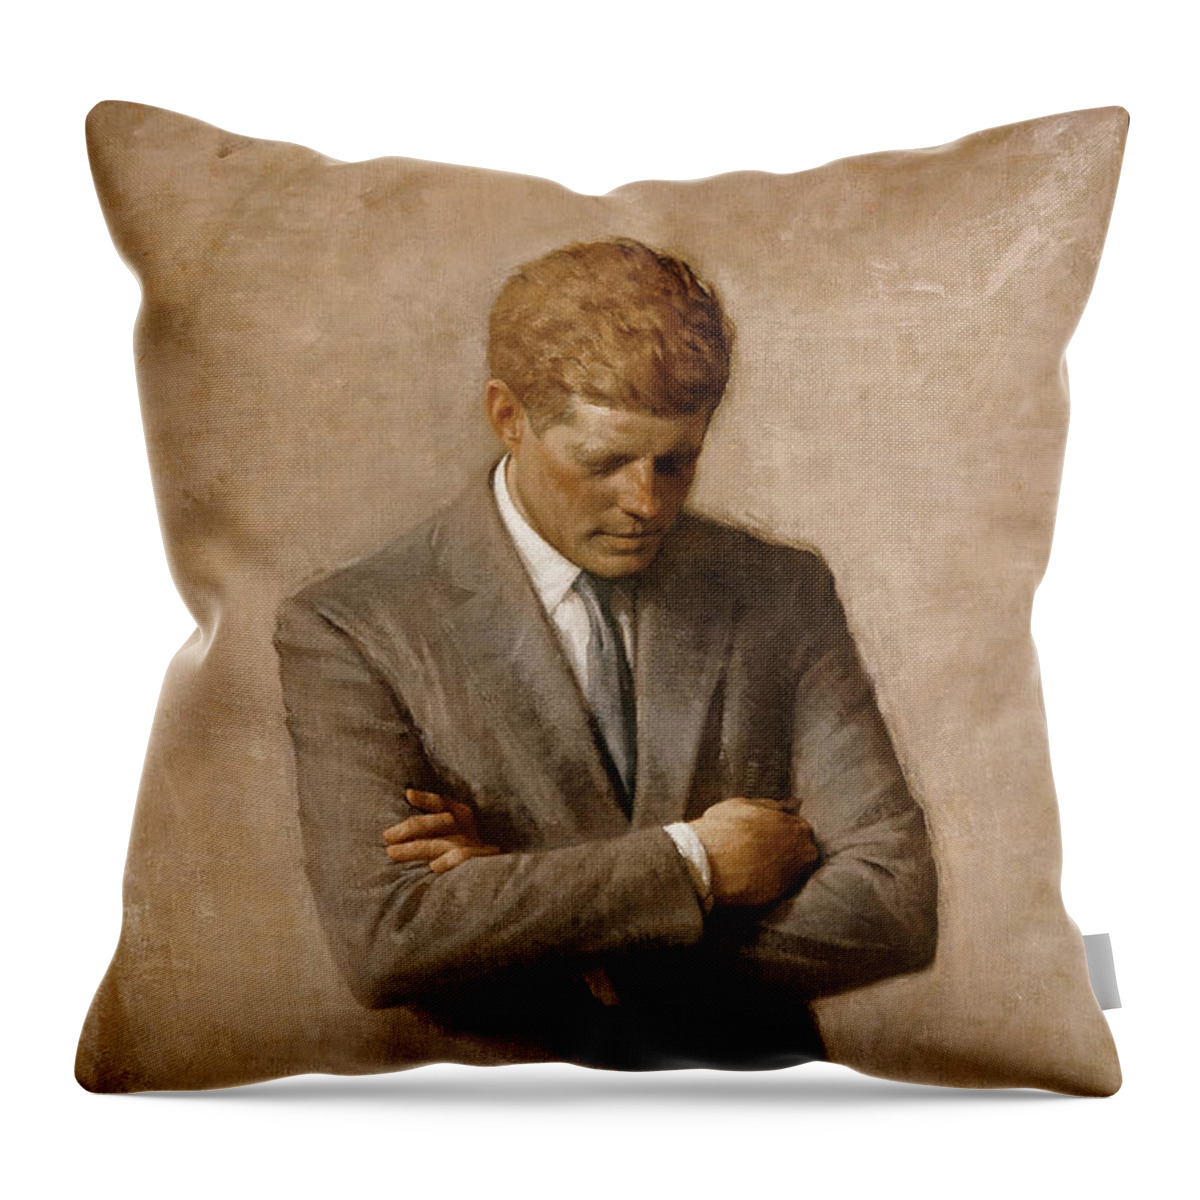 Jfk Throw Pillow featuring the painting John F Kennedy by War Is Hell Store